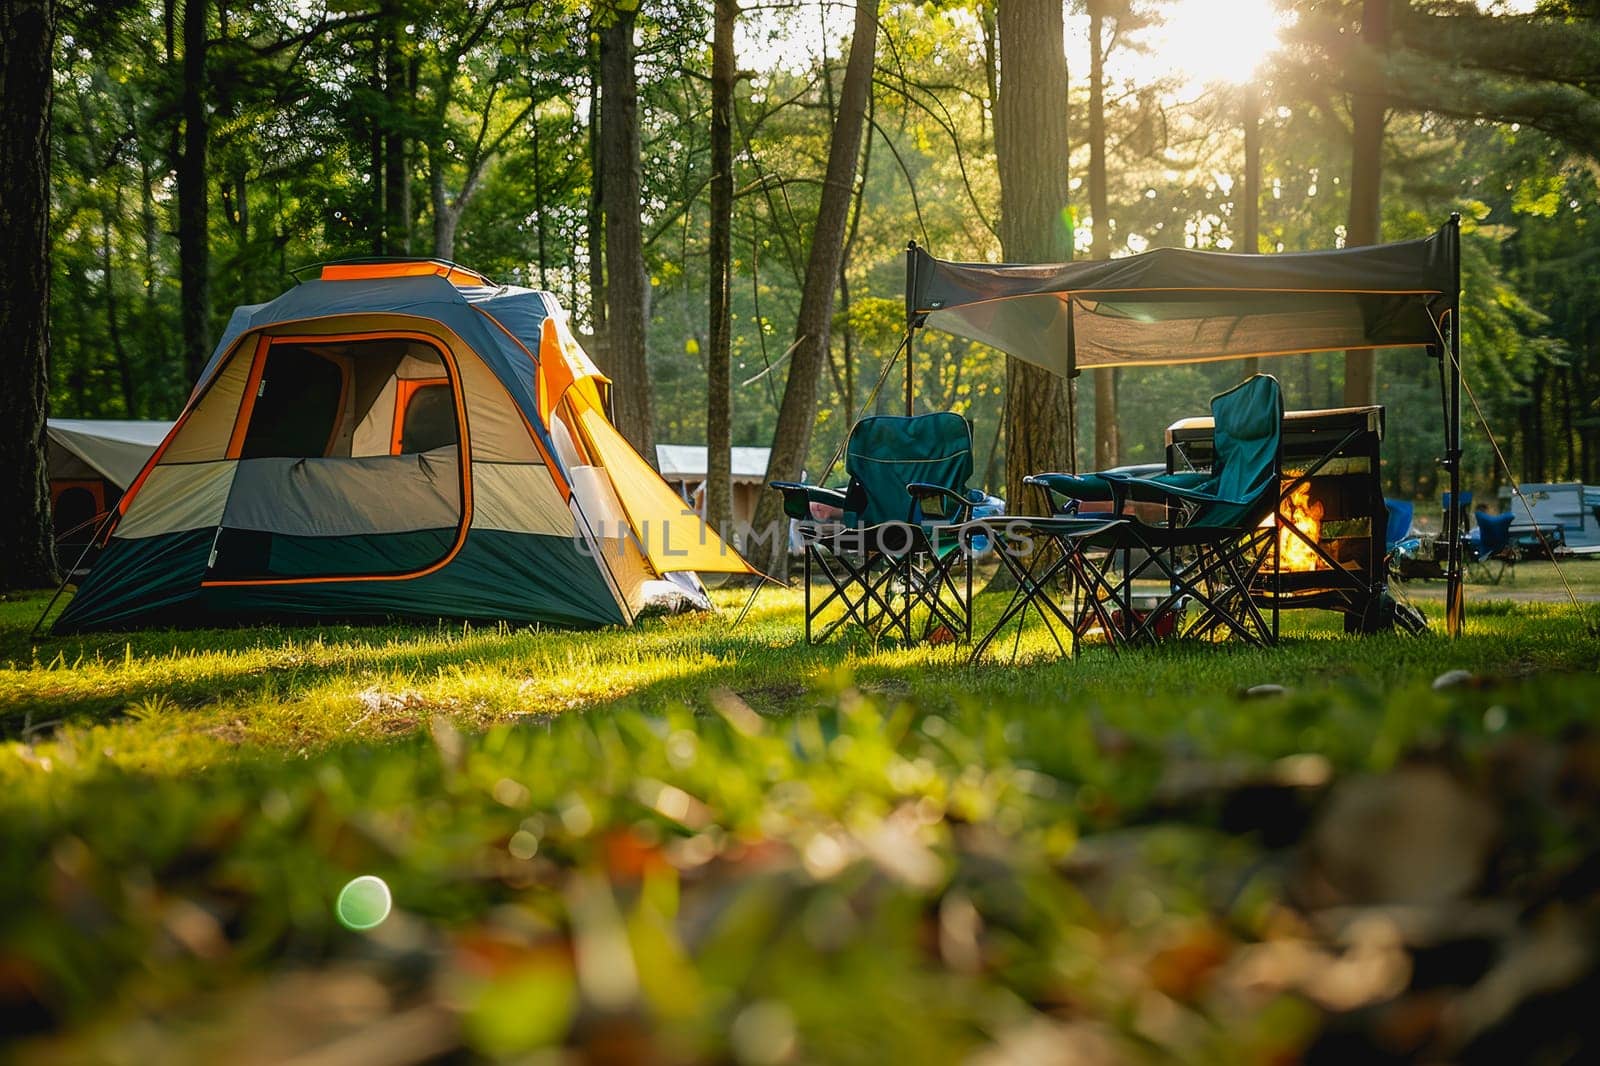 Camping outdoors with lots of sunlight. tent, chairs, a tent BBQ rack, and more.